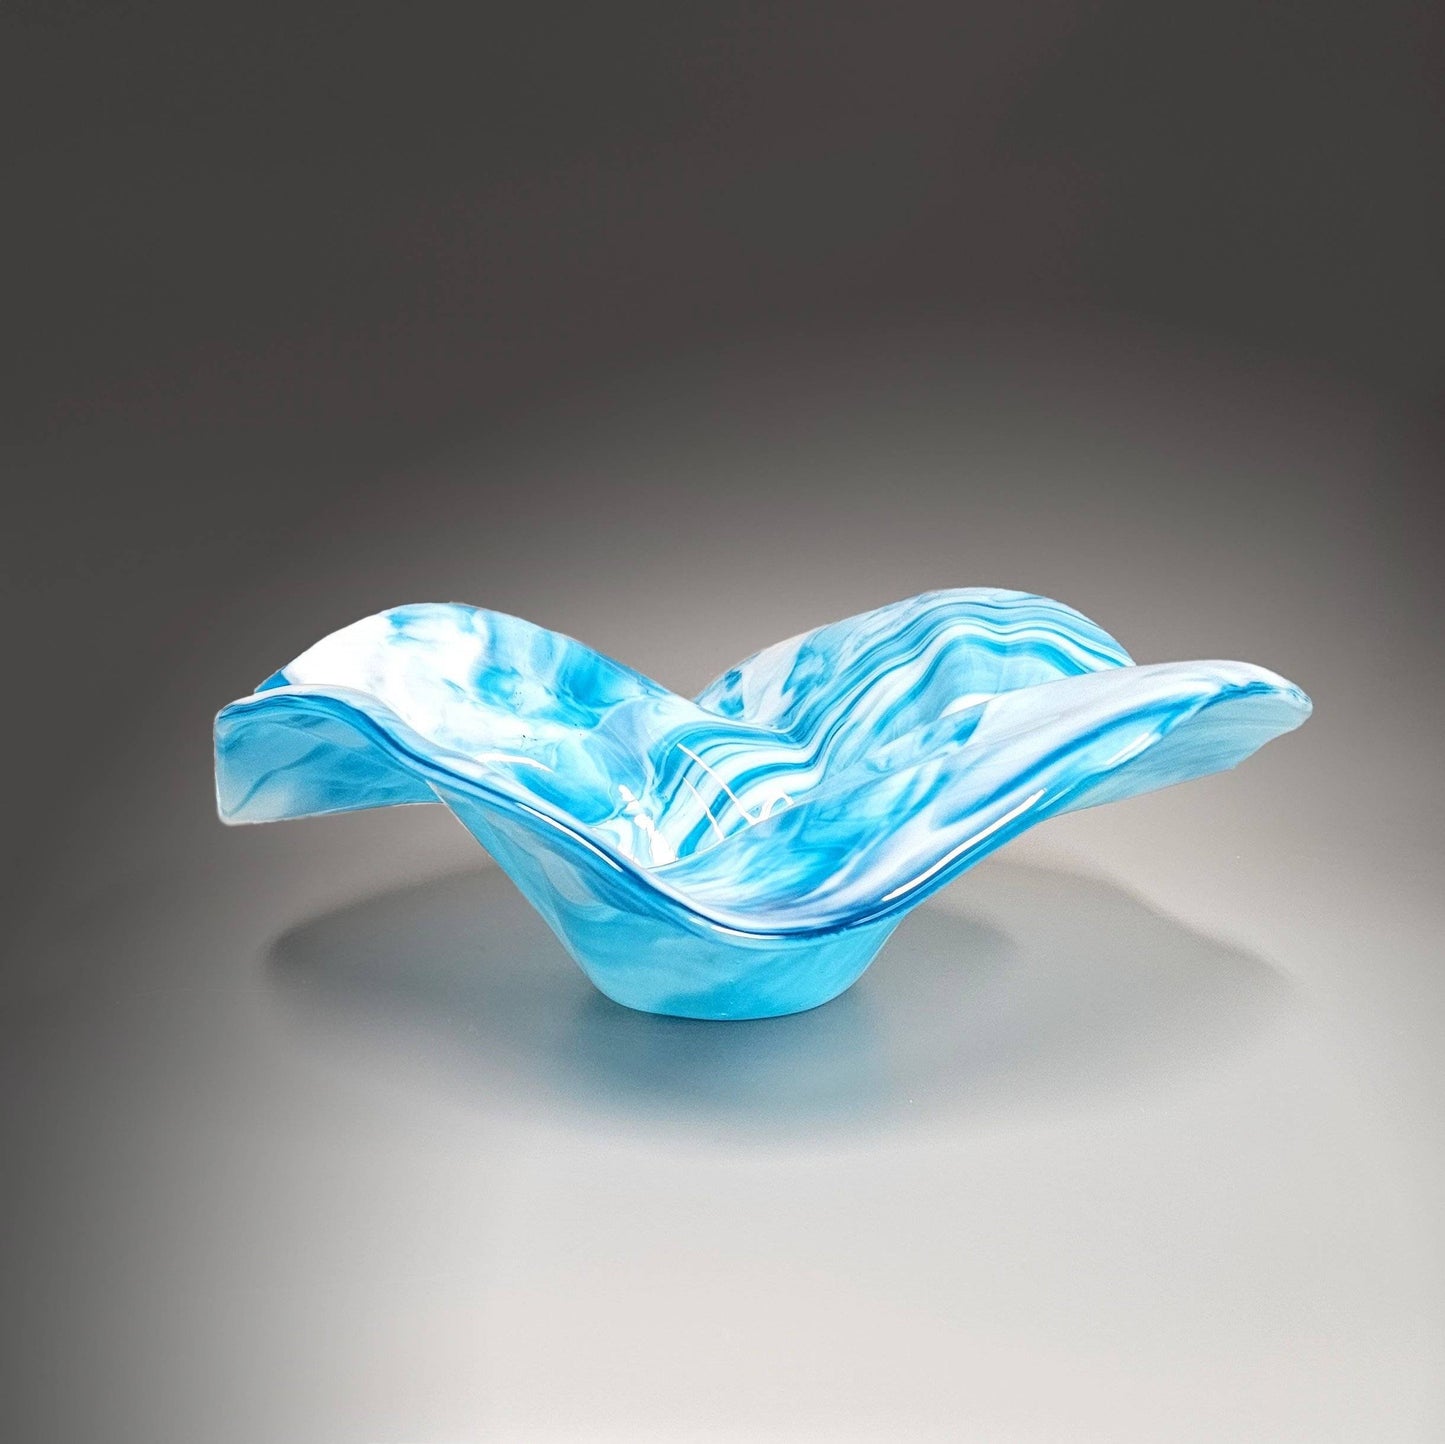 Glass Art Wave Bowl in Turquoise Blue and White